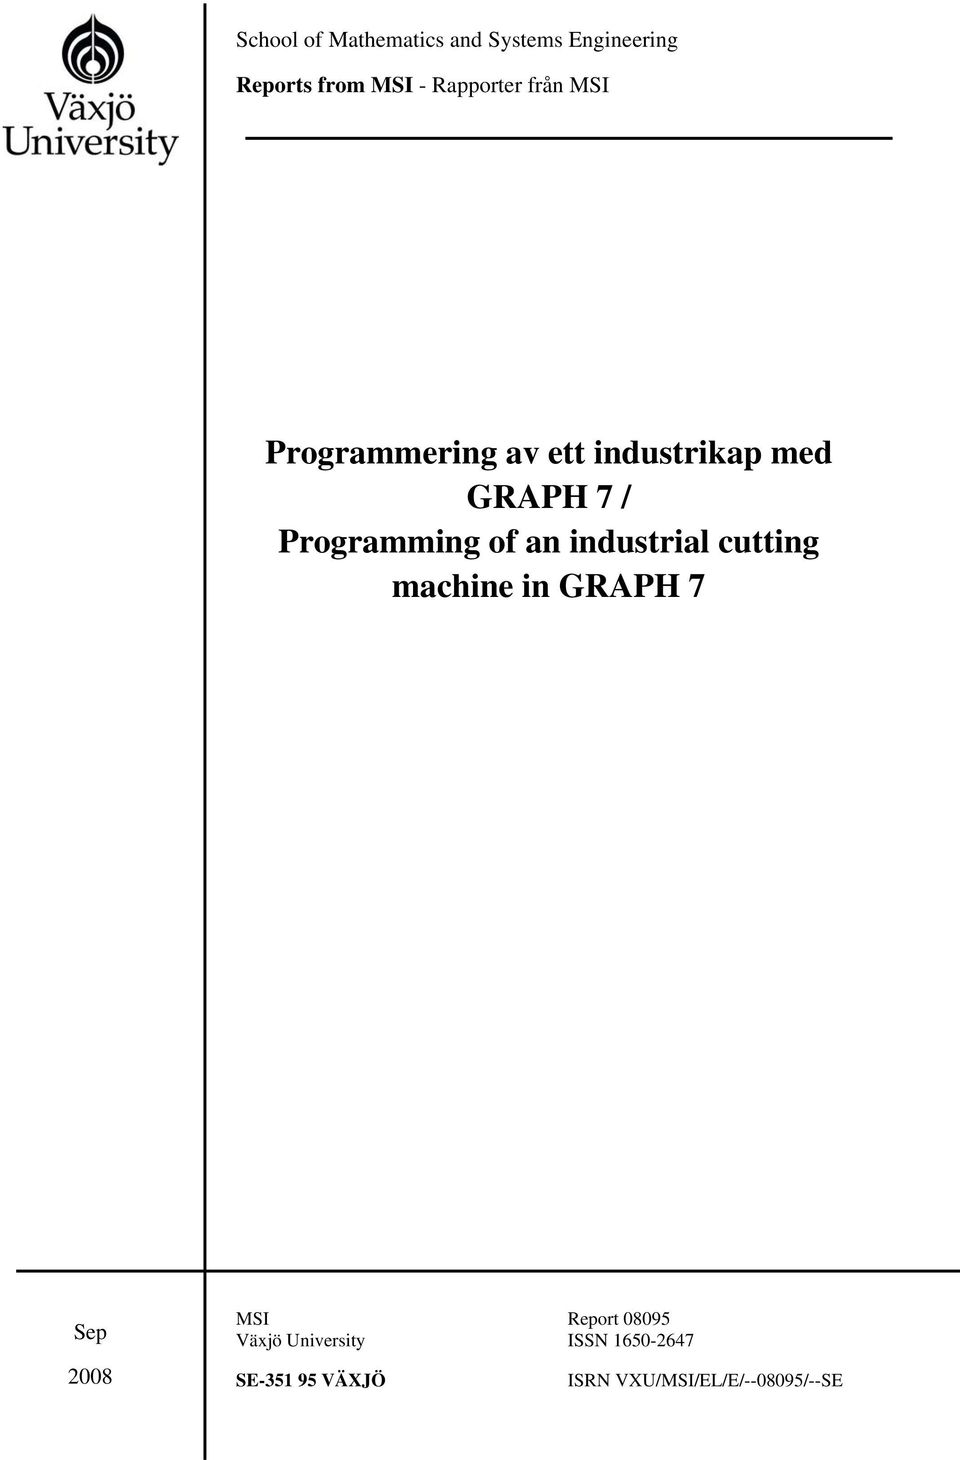 Programming of an industrial cutting machine in GRAPH 7 Sep MSI Report